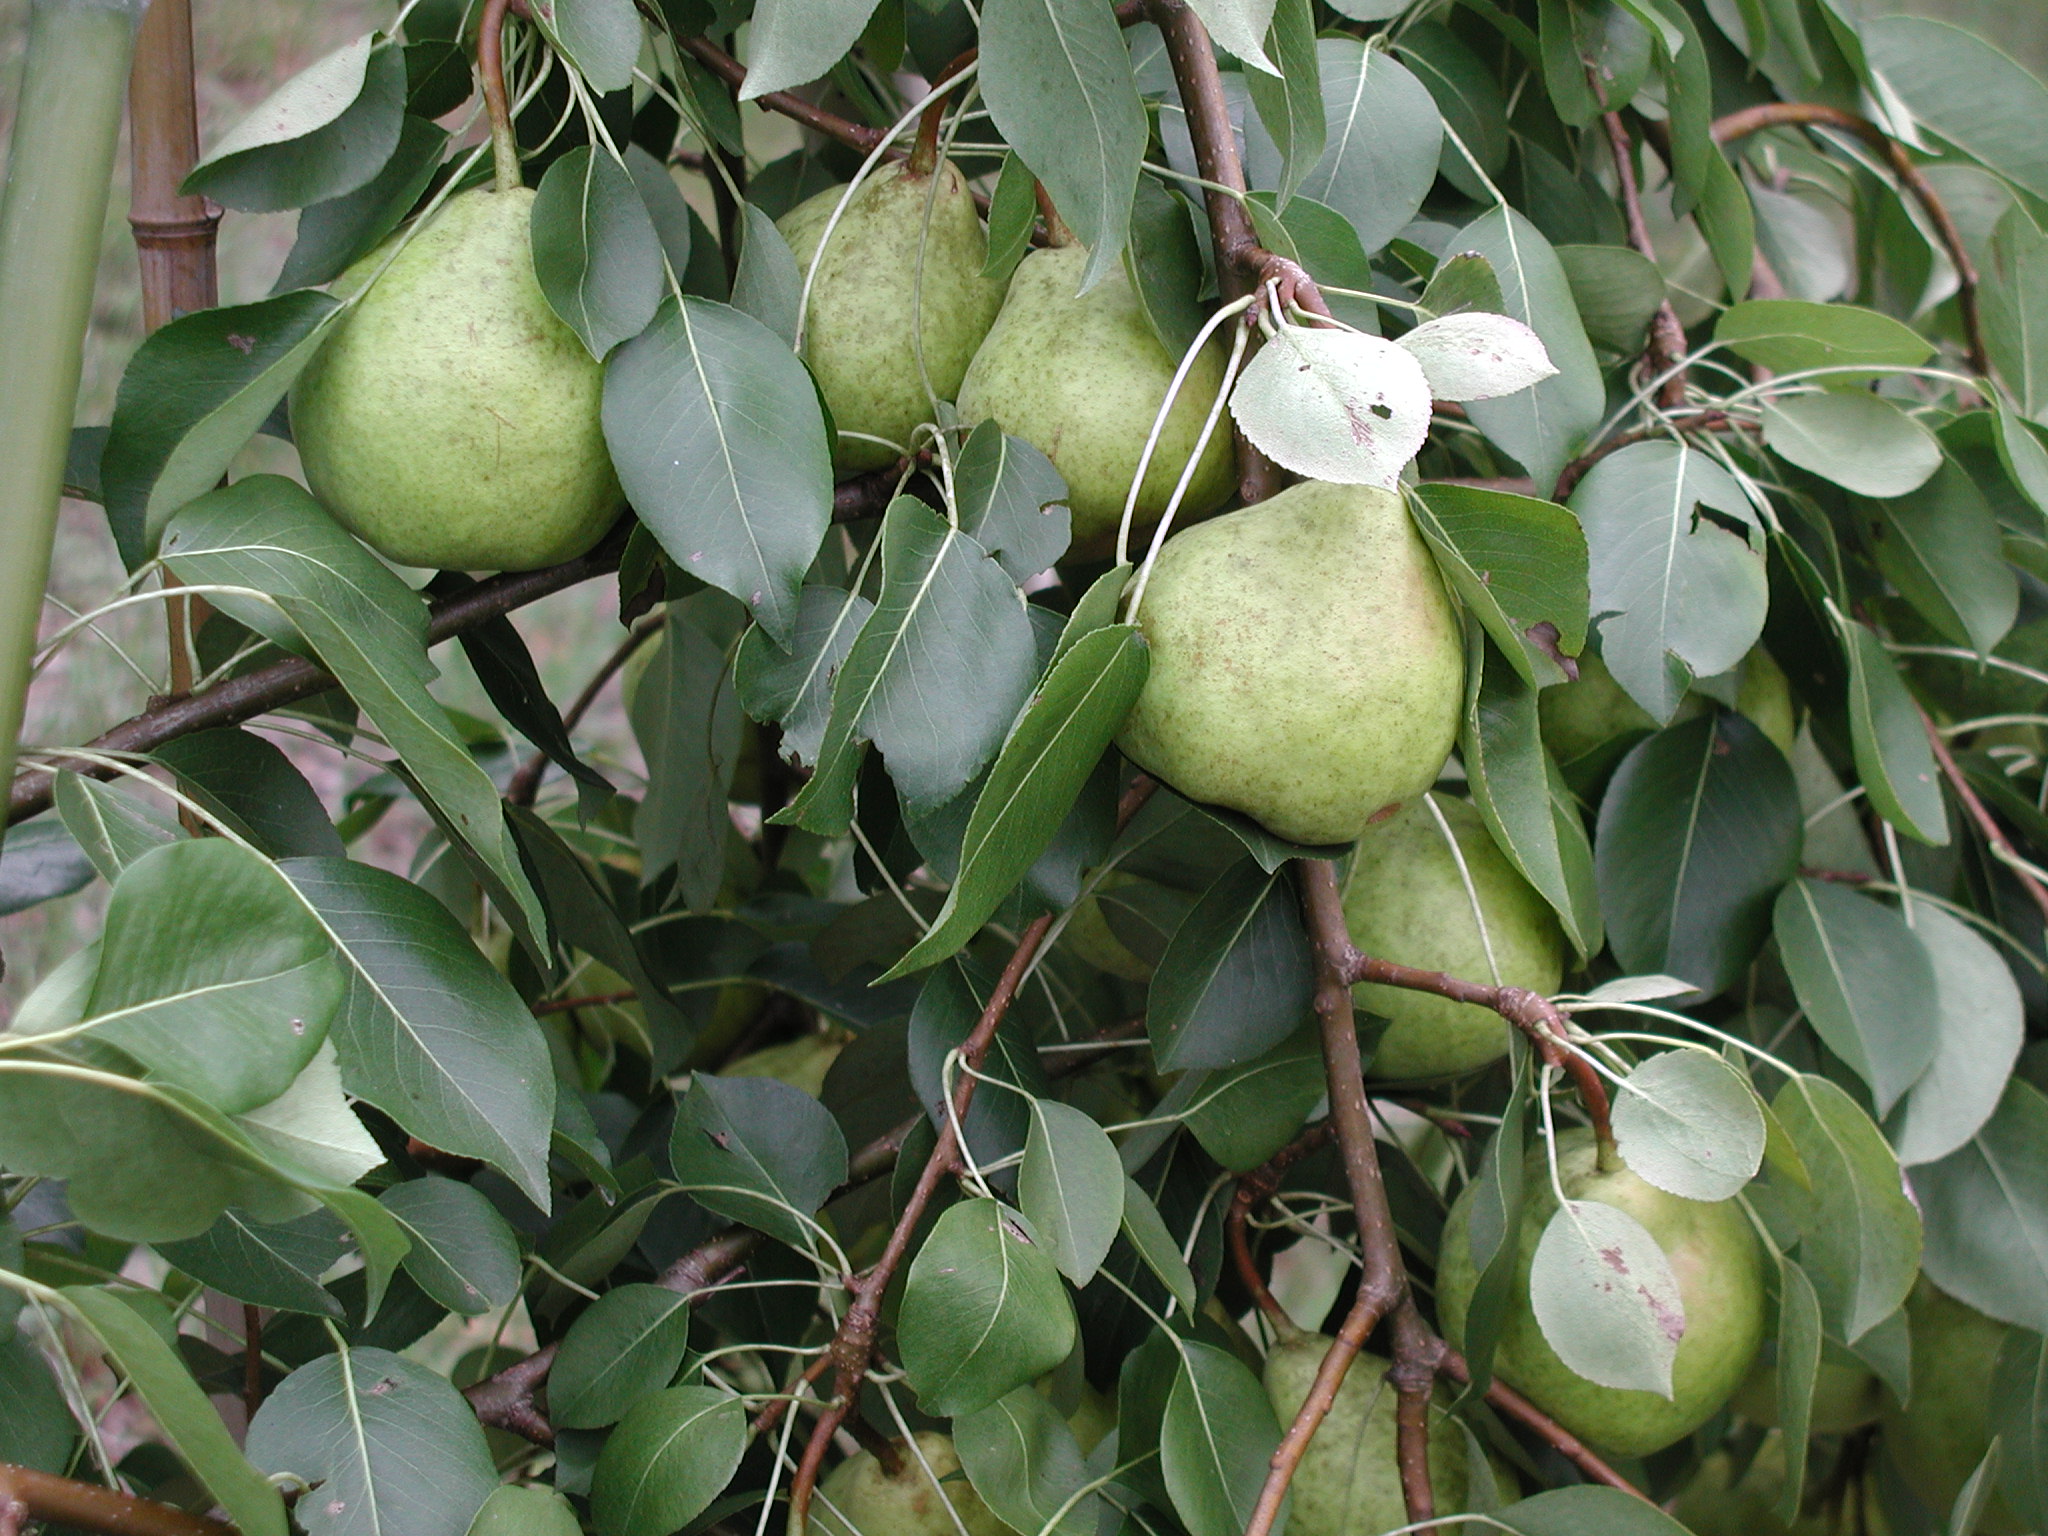 Dwarf Comice Pear Tree - The soft and sweet Christmas pear delicacy. (2  years old and 3-4 feet tall.)